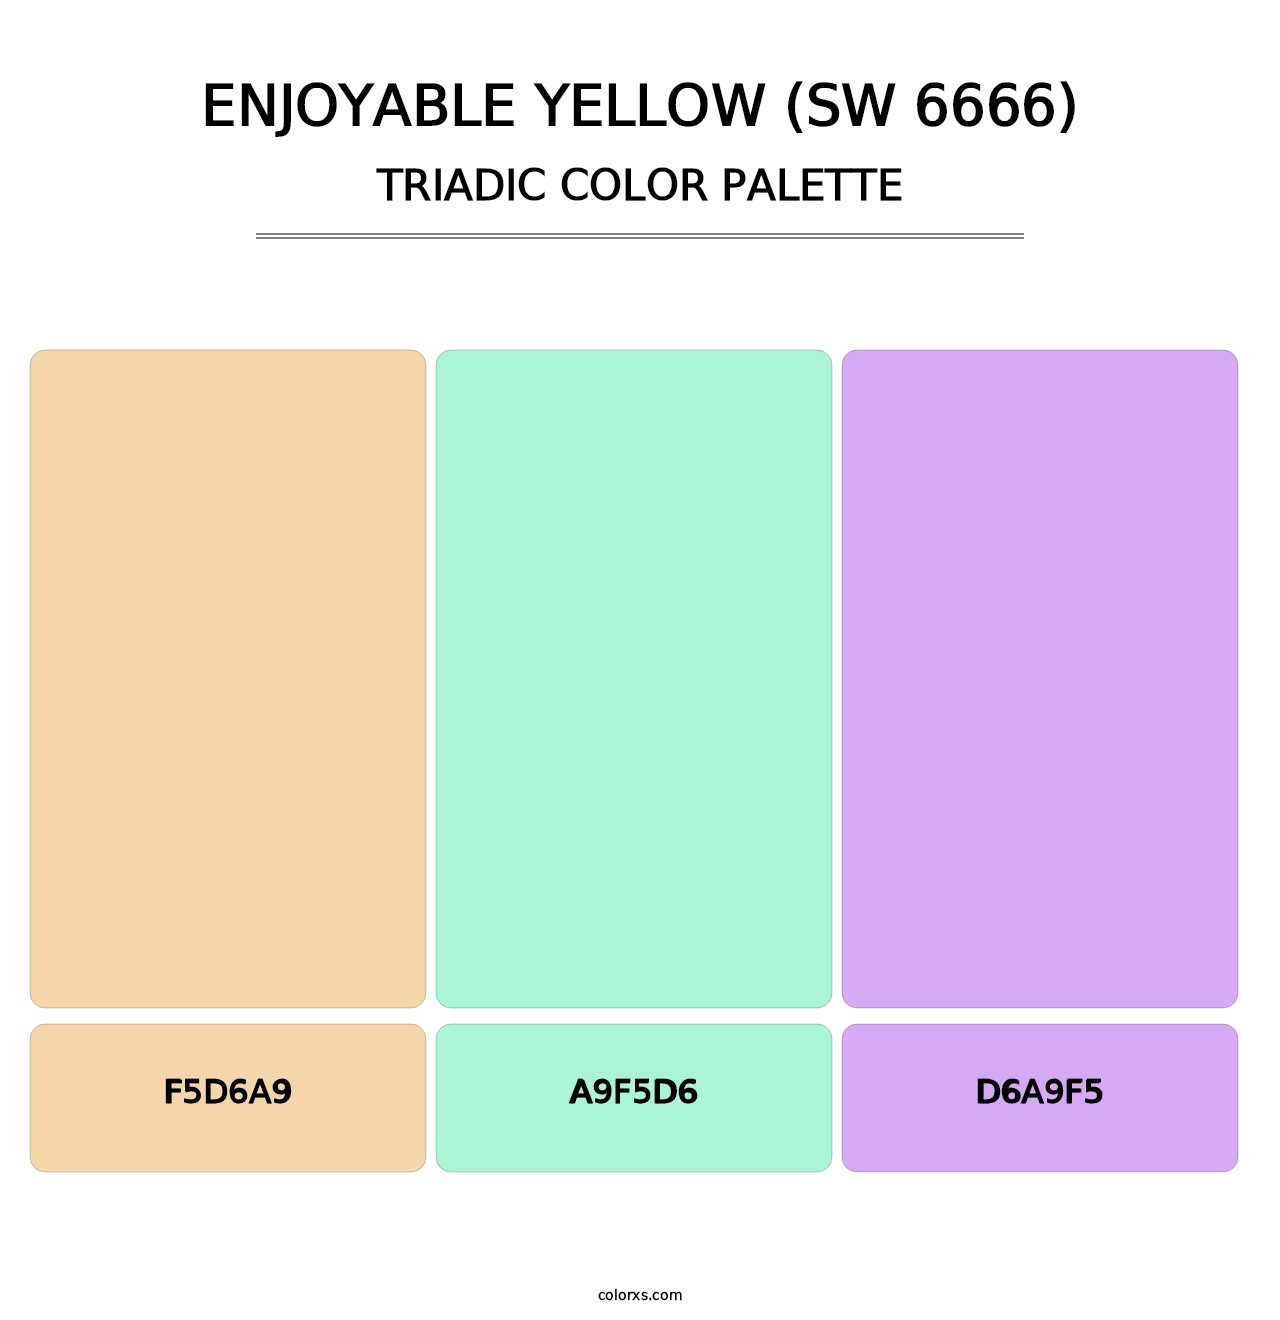 Enjoyable Yellow (SW 6666) - Triadic Color Palette